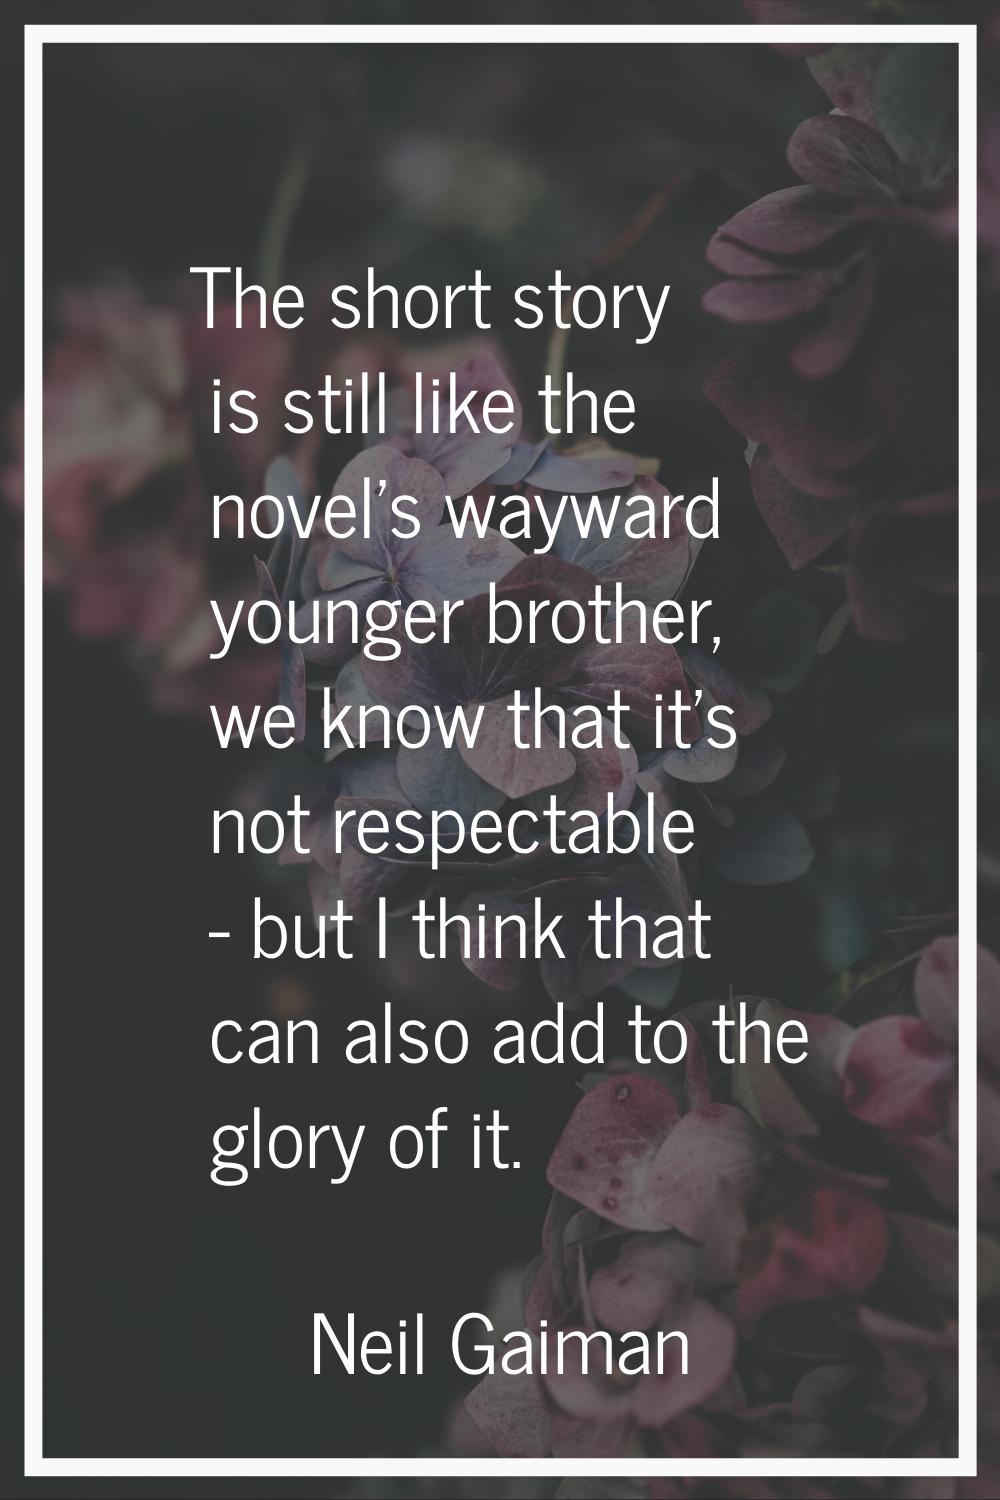 The short story is still like the novel's wayward younger brother, we know that it's not respectabl